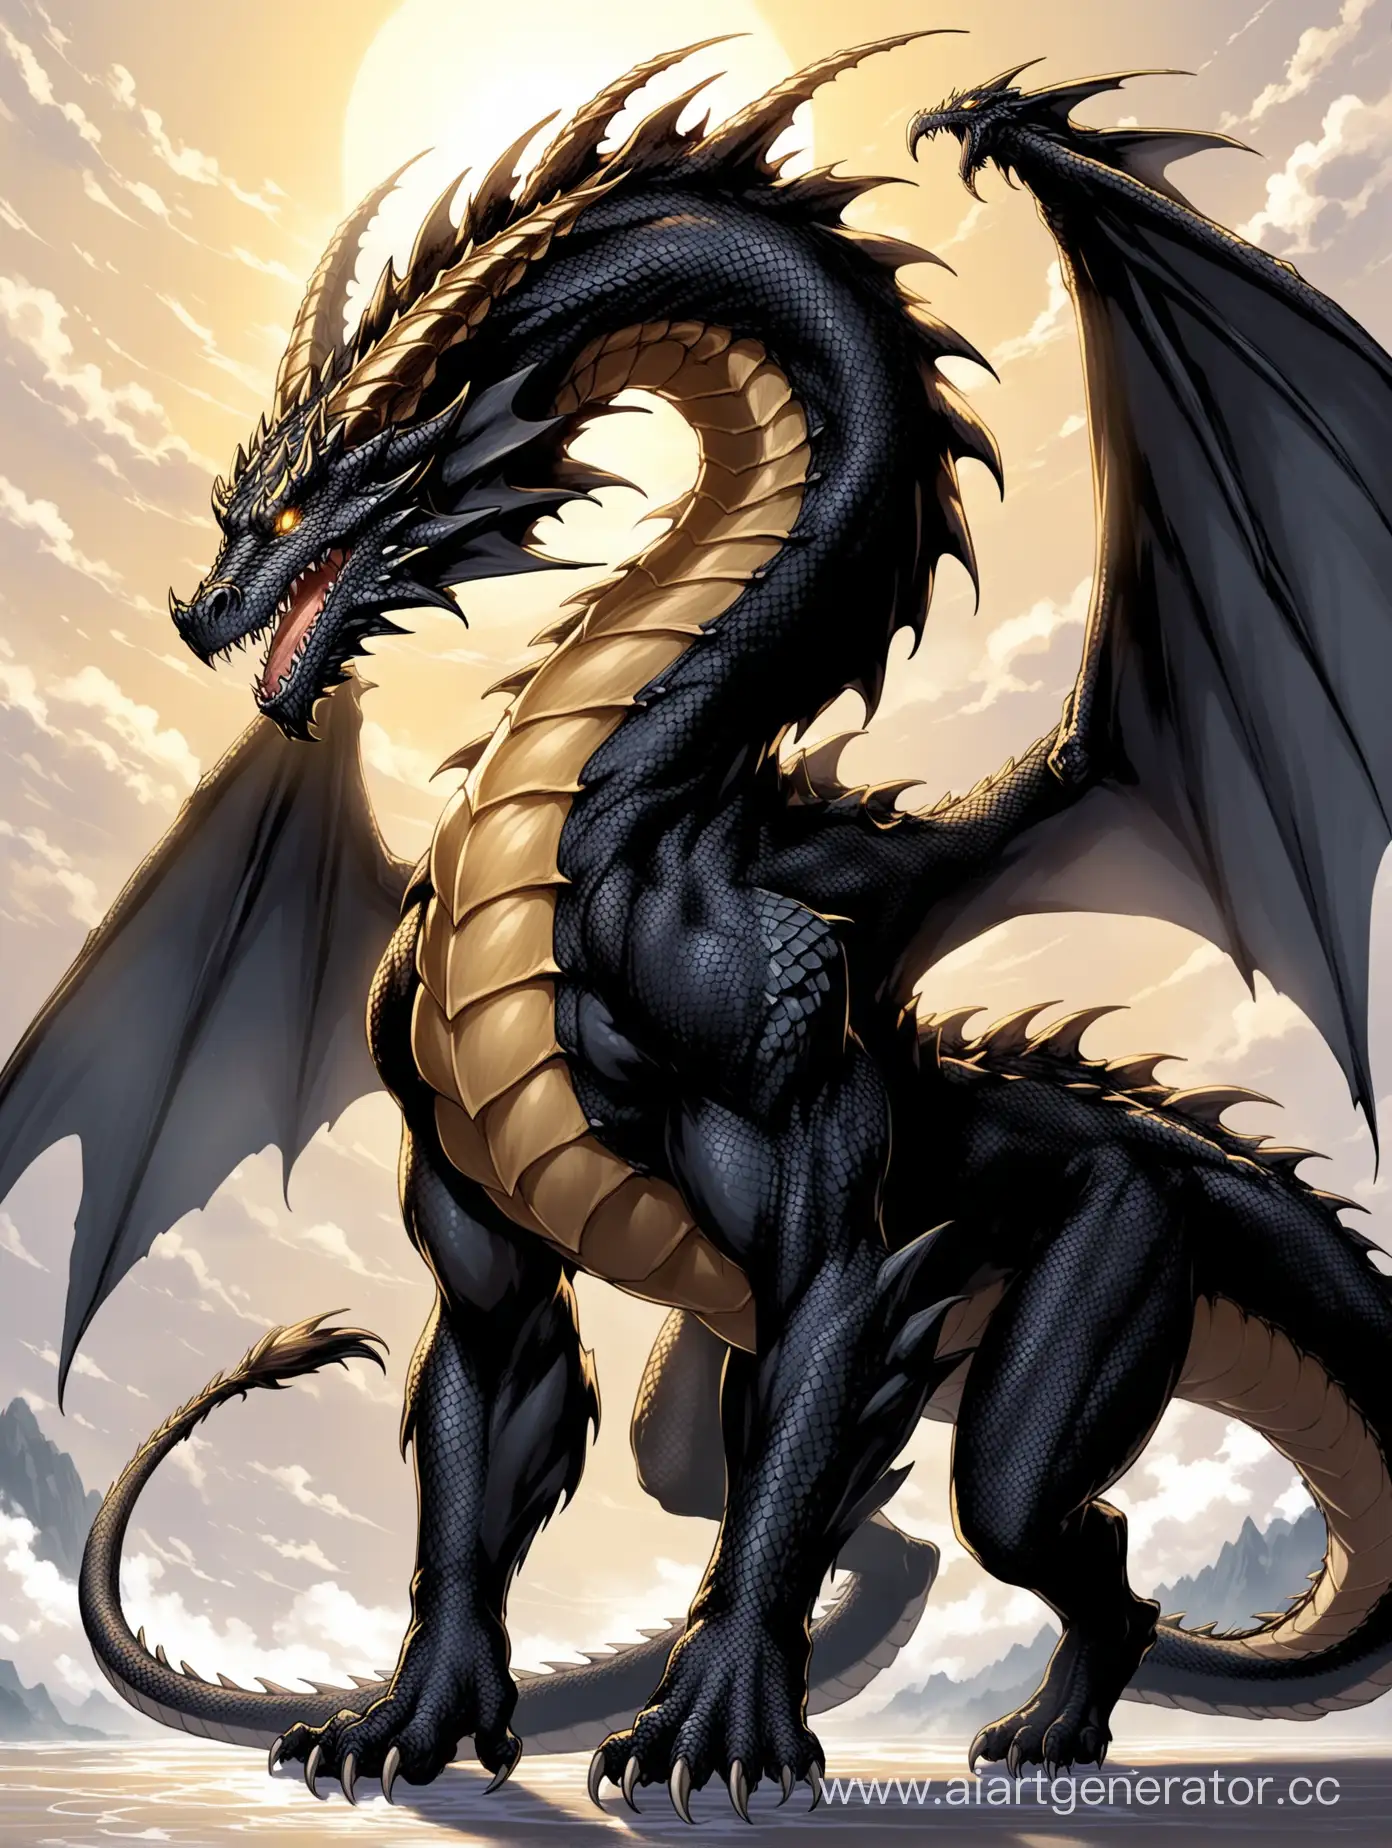 A 106898 year old dragon with two forms: a dragon and a human, capable of easily changing his appearance from his true dragon form to his human form and back to his dragon form.

Human Form: A male approximately 22 or 23 years old with long black hair and piercing golden eyes. He is 250 centimeters (8ft 2.43in) tall and weighing 143 kilograms (315,26lbs). He has a strong, wiry, but at the same time graceful and sophisticated physique. On his head he has two dark gray horns, slightly curved back, and from his lower back grows a dragon tail, which is a direct extension of his spine, about 182,88 centimeters (6ft) long, covered with black scales. It has webbed dragon wings with a span of 6 meters (19,69ft).

Dragon (True) Form: A giant dragon that has two large wings on its back and walks on all fours. Everything is covered with black scales, and on the head there are two dark gray horns. The eyes are golden, with vertical cat-like pupils. The length from the tip of the tail to the tip of the muzzle is 250 meters, where 120 is the tail, 119 is the body and 11 is the neck and head. Height at withers 140 meters. Weight 3000 kg (6613.8677lbs)